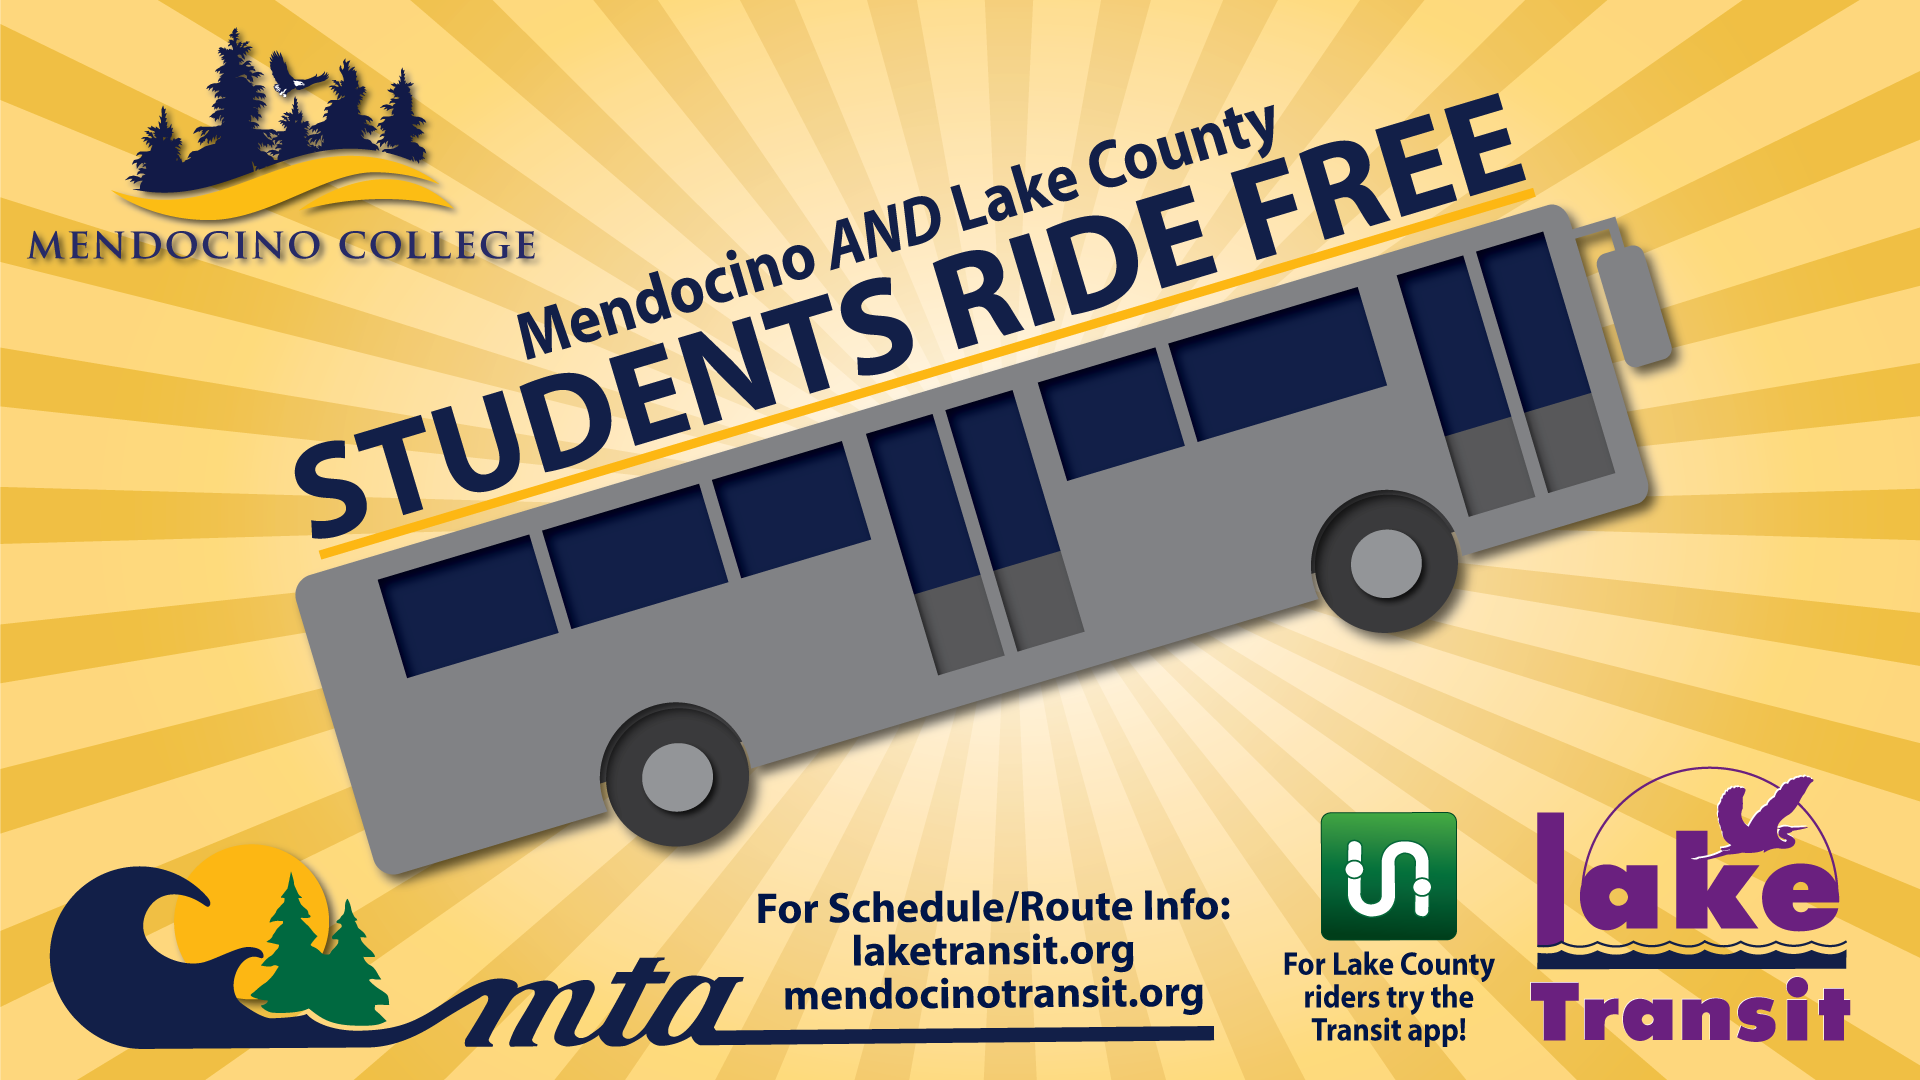 Students Ride Free Ad